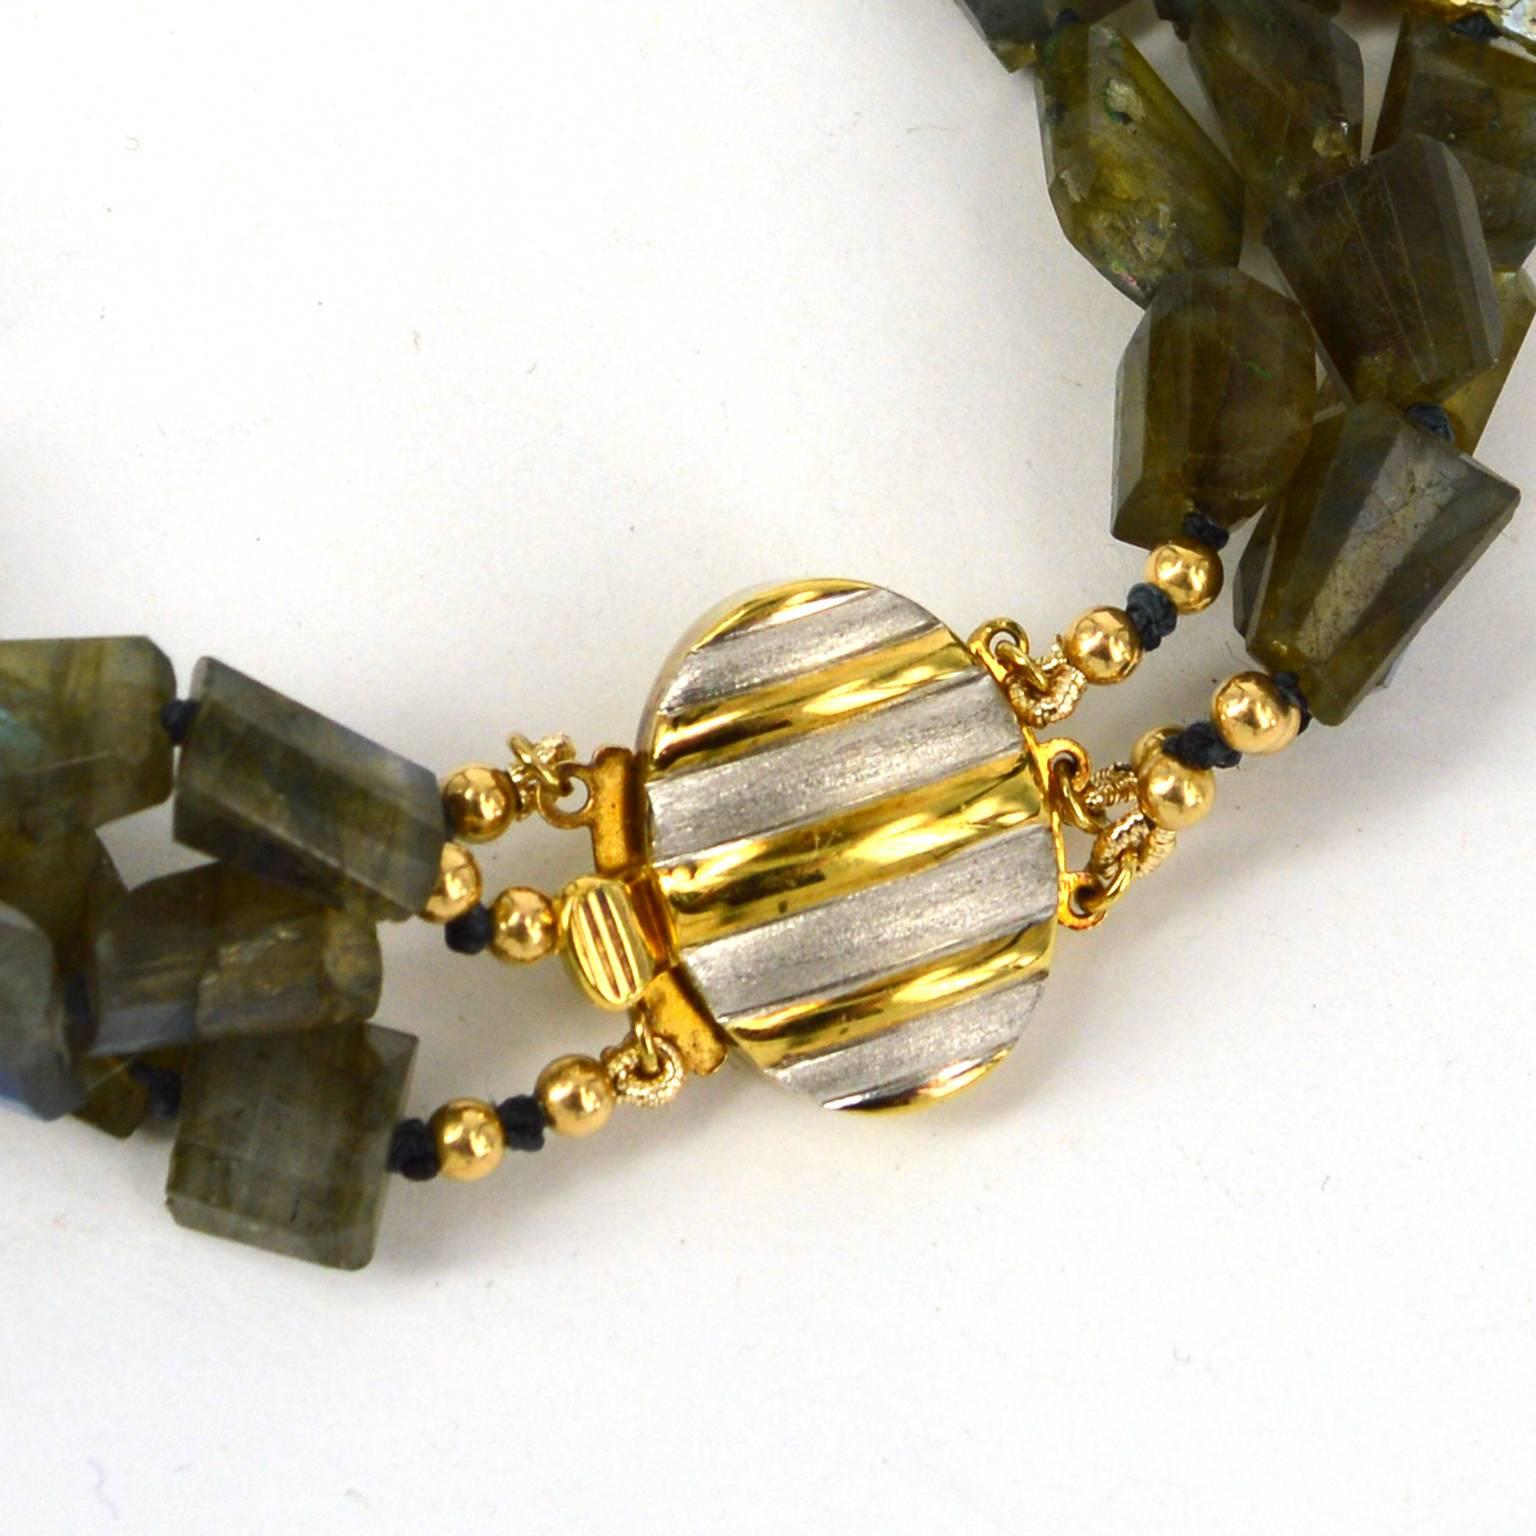 Three stranded Labradorite faceted nuggets and Freswater Keshi Pearl necklace. With vermeil beads and decorative clasp.
Hand knotted on grey thread. 

All stones and pearls are natural and as such may include natural inclusions, fracture lines or